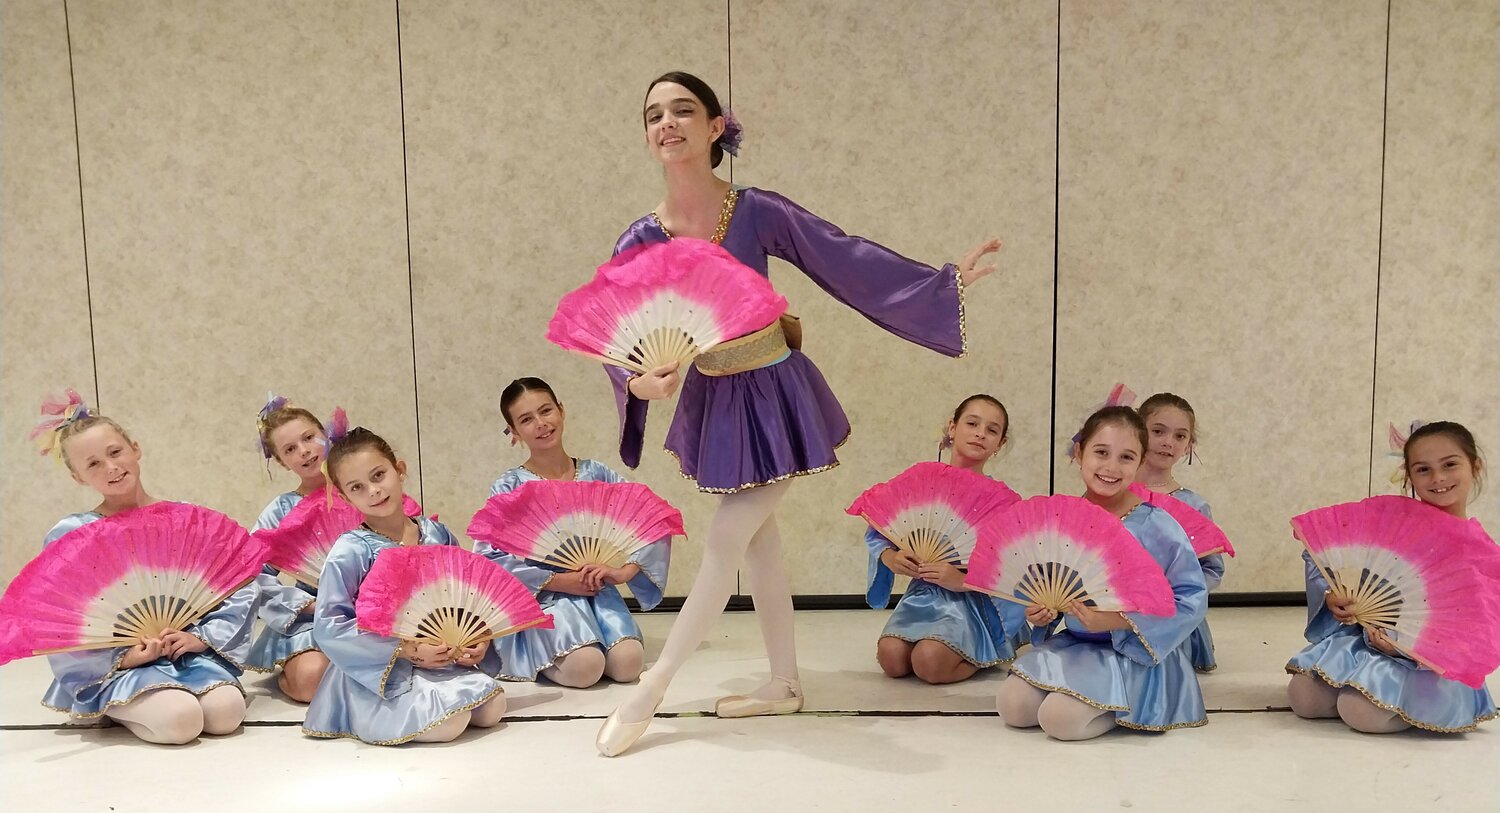 Soloist Madeline Rey, 16, performs the Chinese Dance with other young dancers.